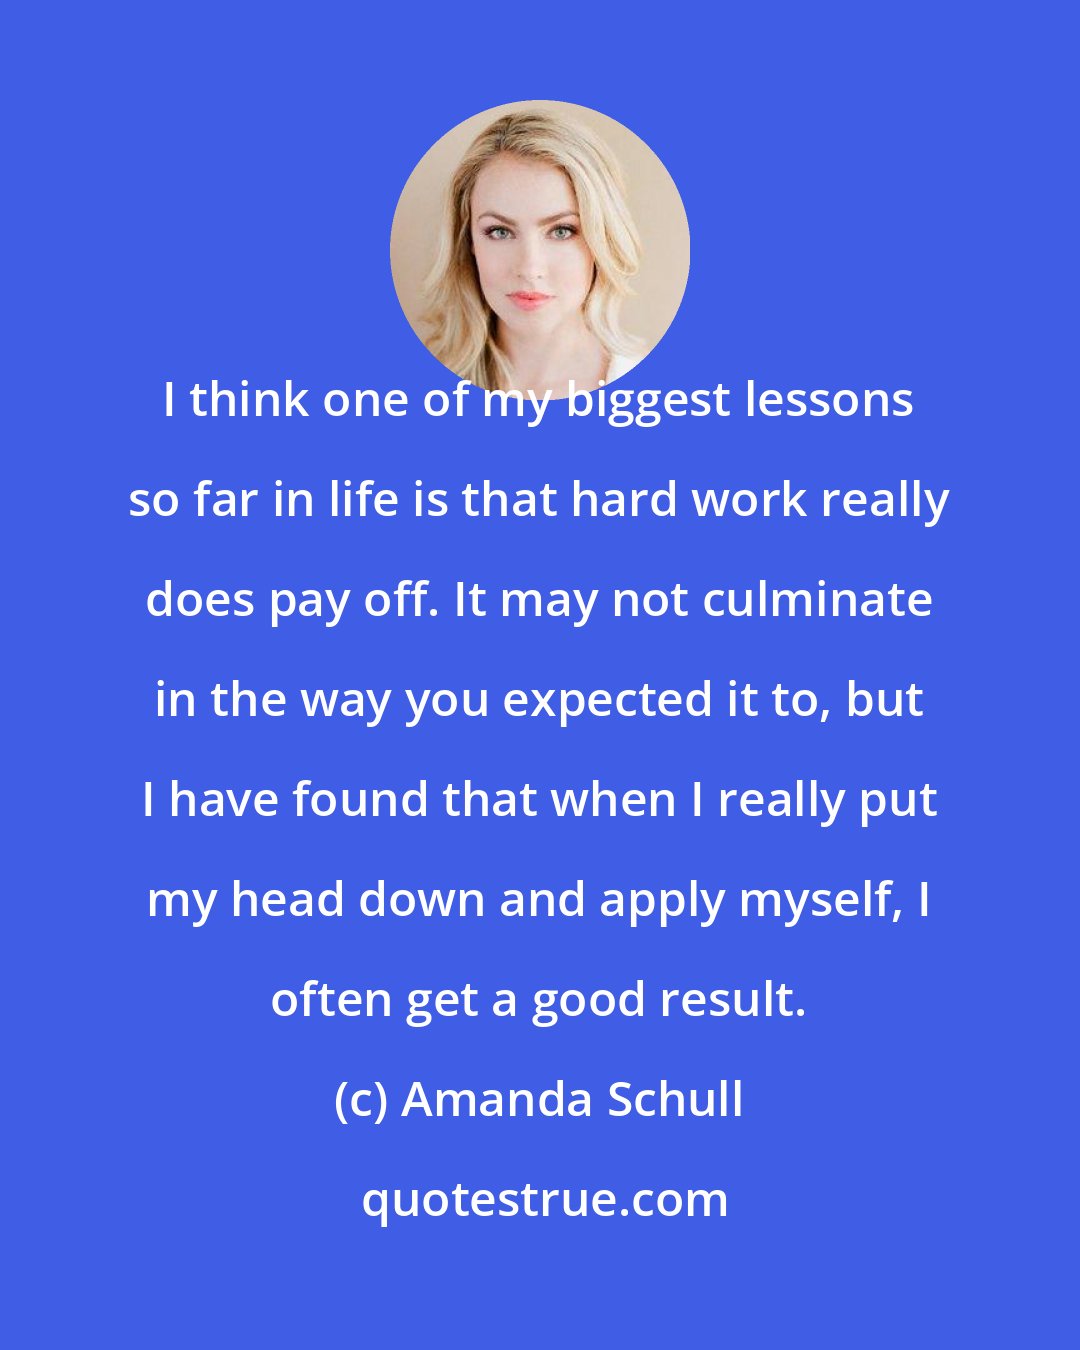 Amanda Schull: I think one of my biggest lessons so far in life is that hard work really does pay off. It may not culminate in the way you expected it to, but I have found that when I really put my head down and apply myself, I often get a good result.